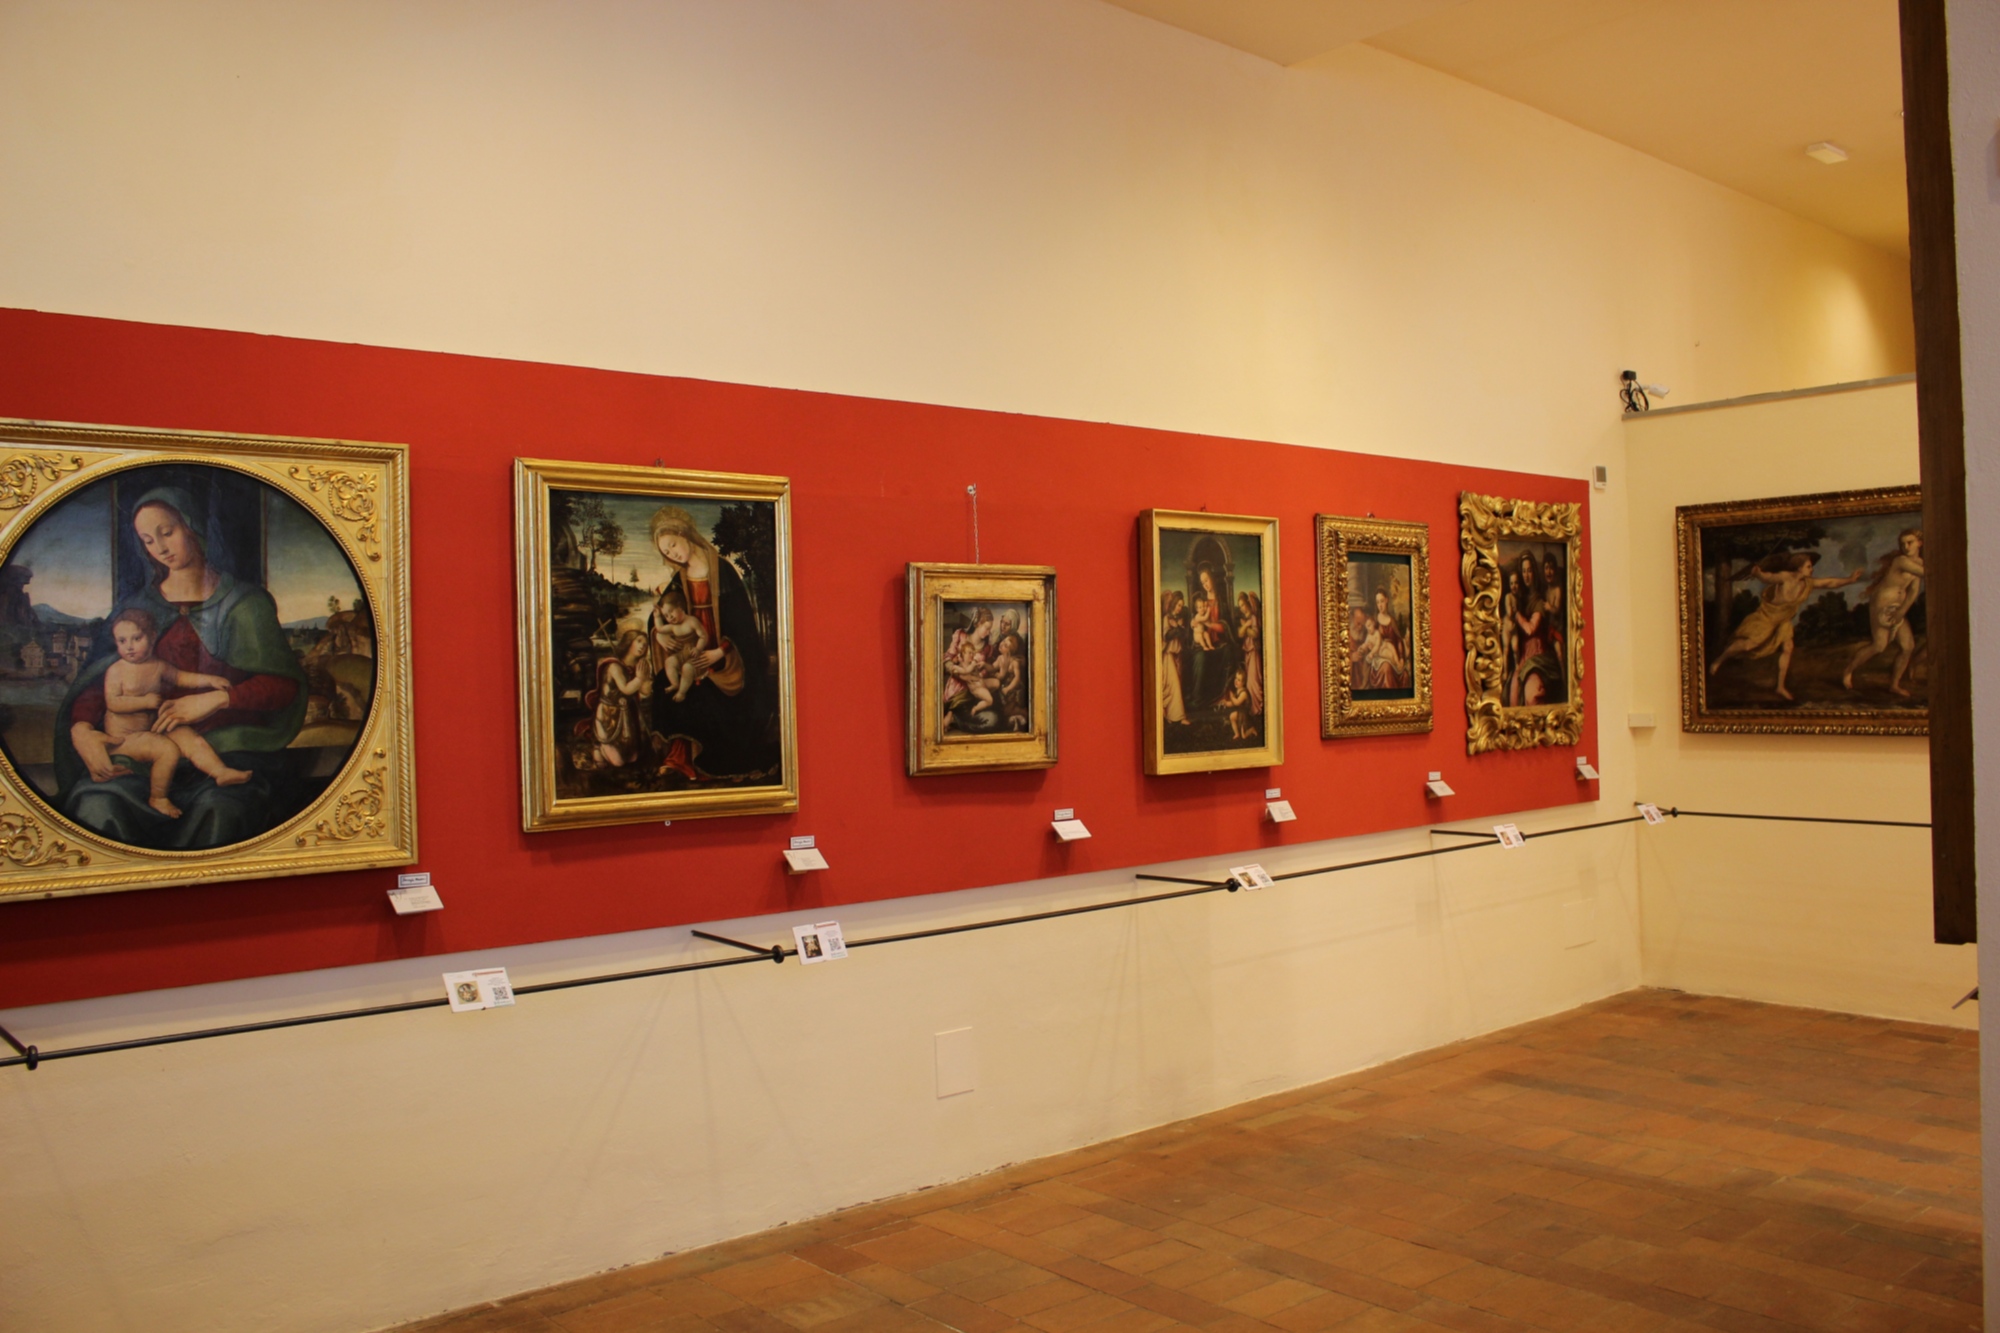 The paintings of the Crociani Civic Museum